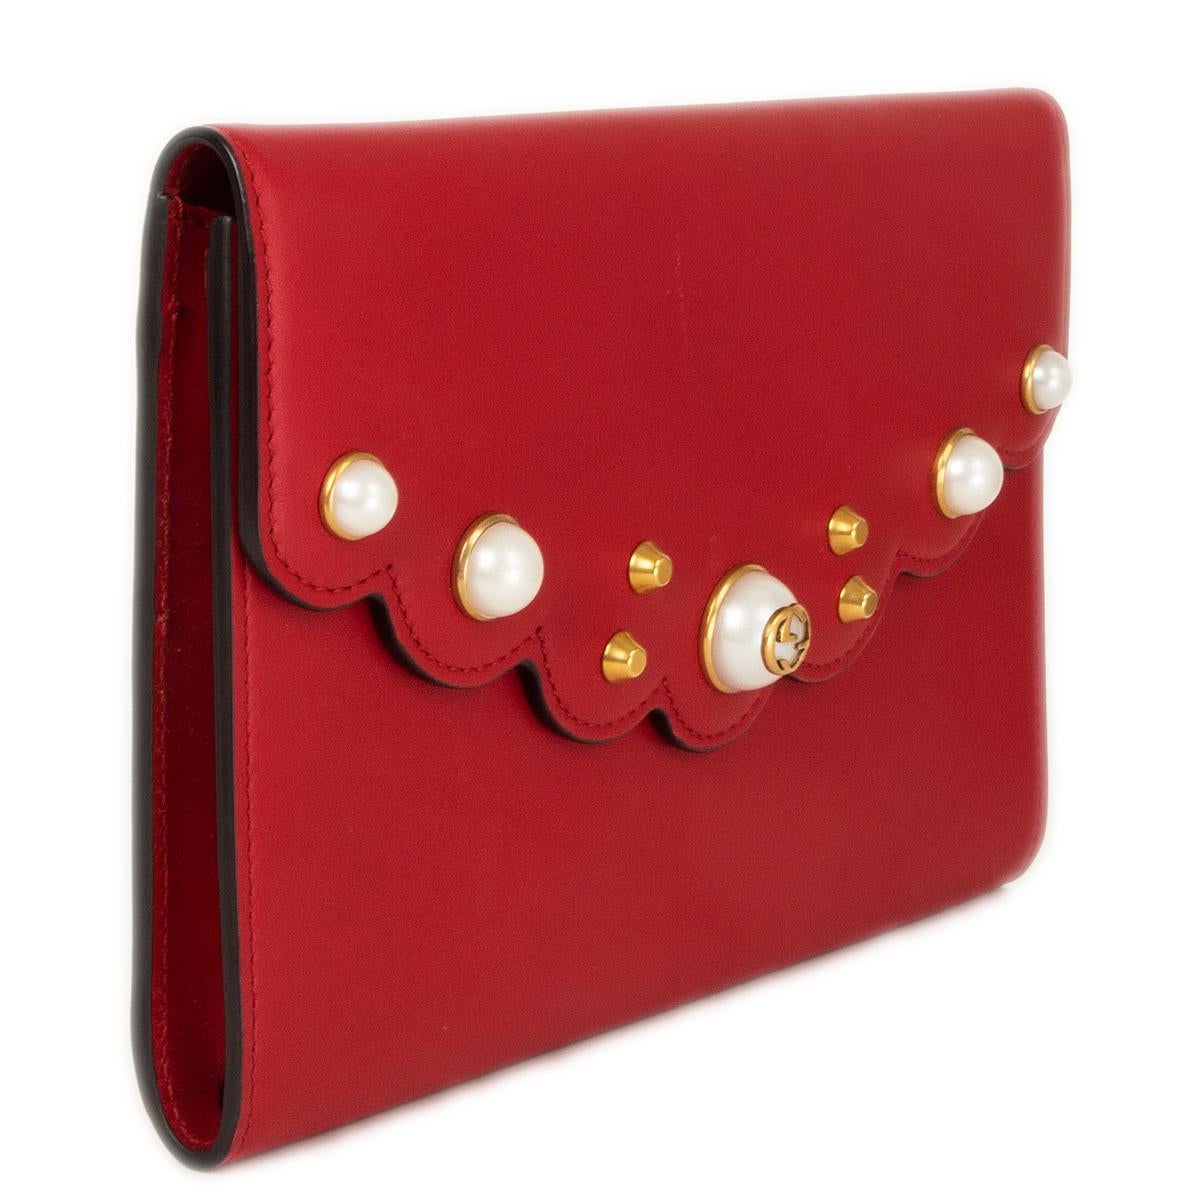 100% authentic Gucci Peony clutch in red calfskin with scalloped edges and pearl embellished flap. Lined in brown nylon with six card slots and one big zipper pocket. Brand new. Has some faint but noticable scratch at the flap. Comesw ith dust bag.